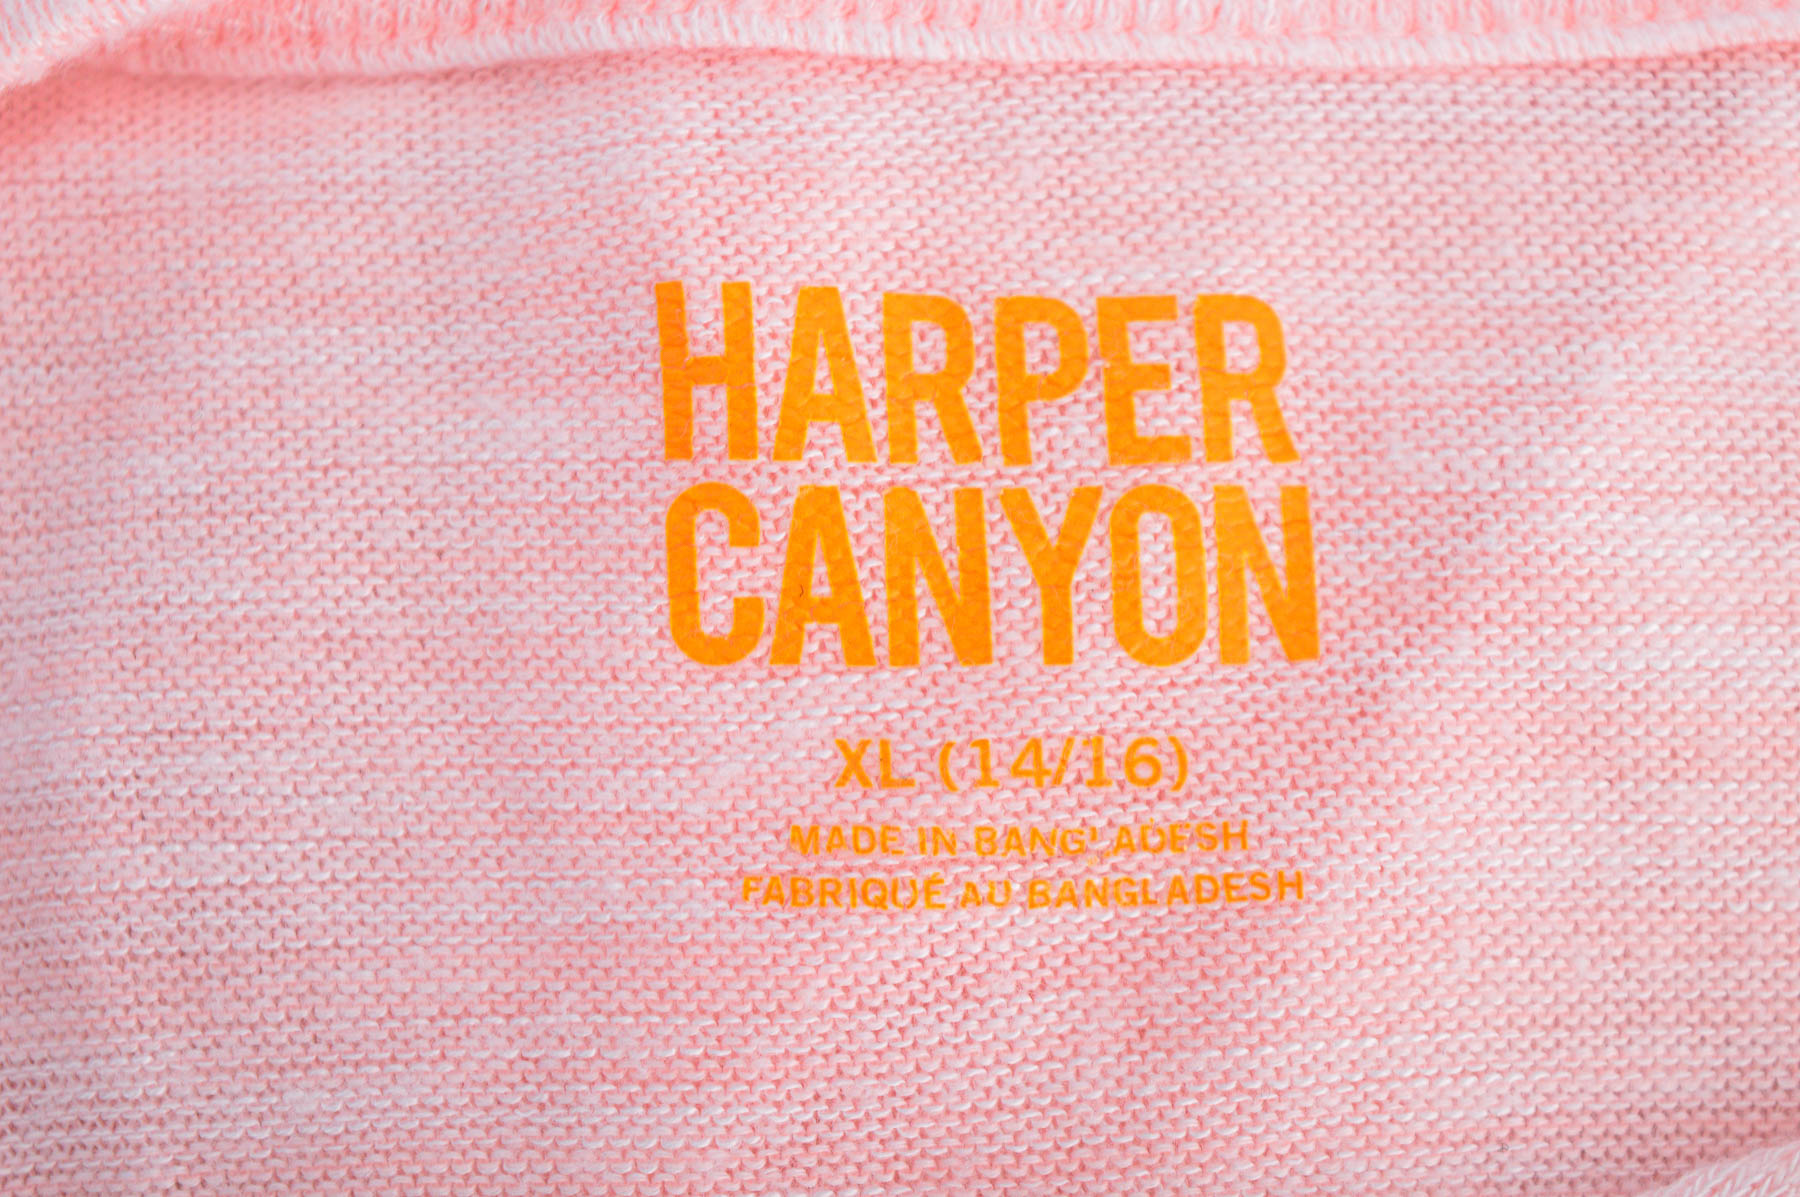 Sweaters for Girl - Harper Canyon - 2